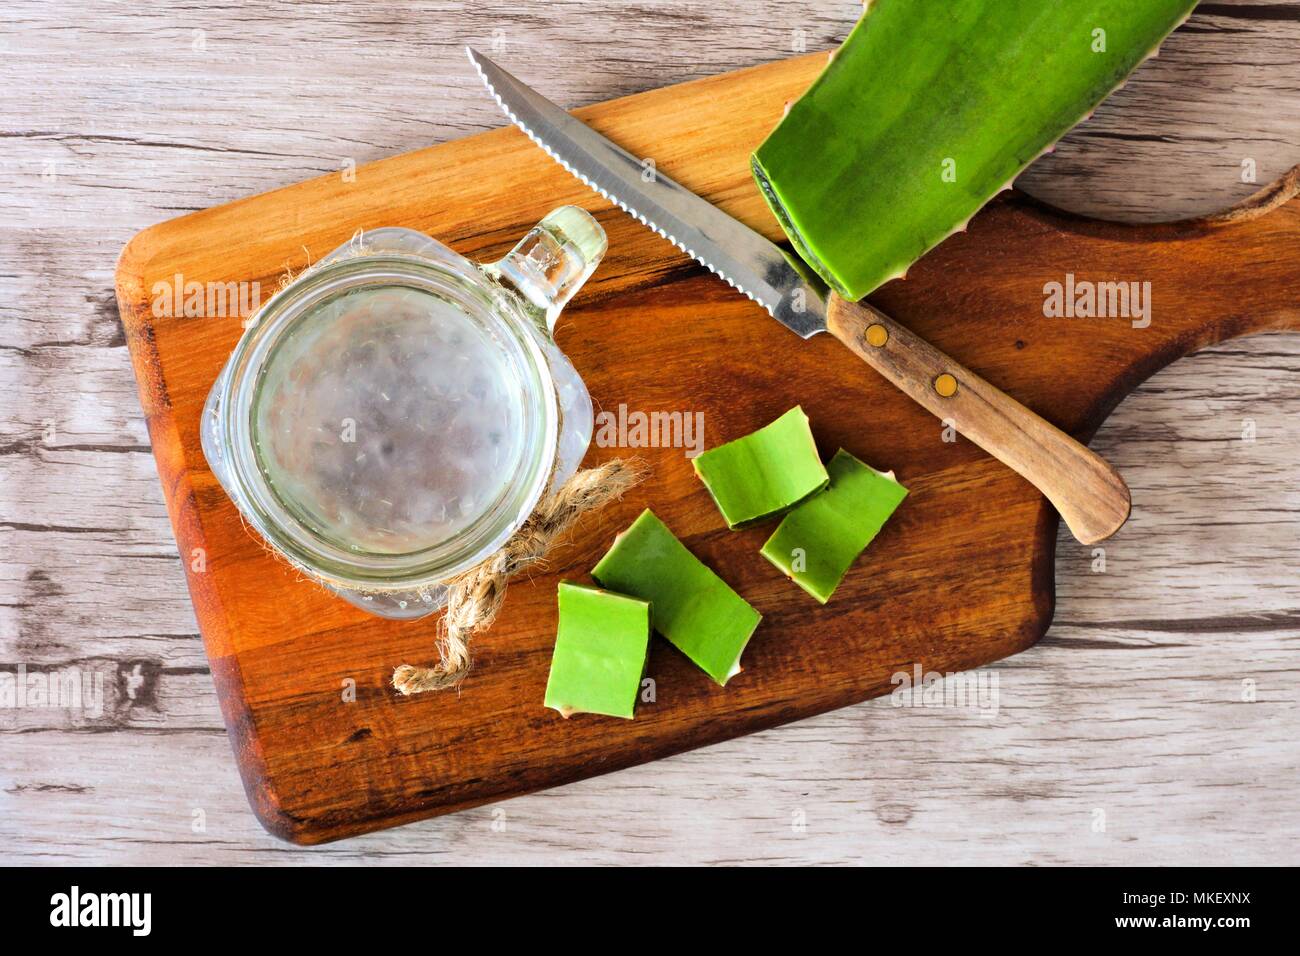 Healthy Aloe vera juice in a mason jar glass. Top view scene on a wooden paddle board. Stock Photo